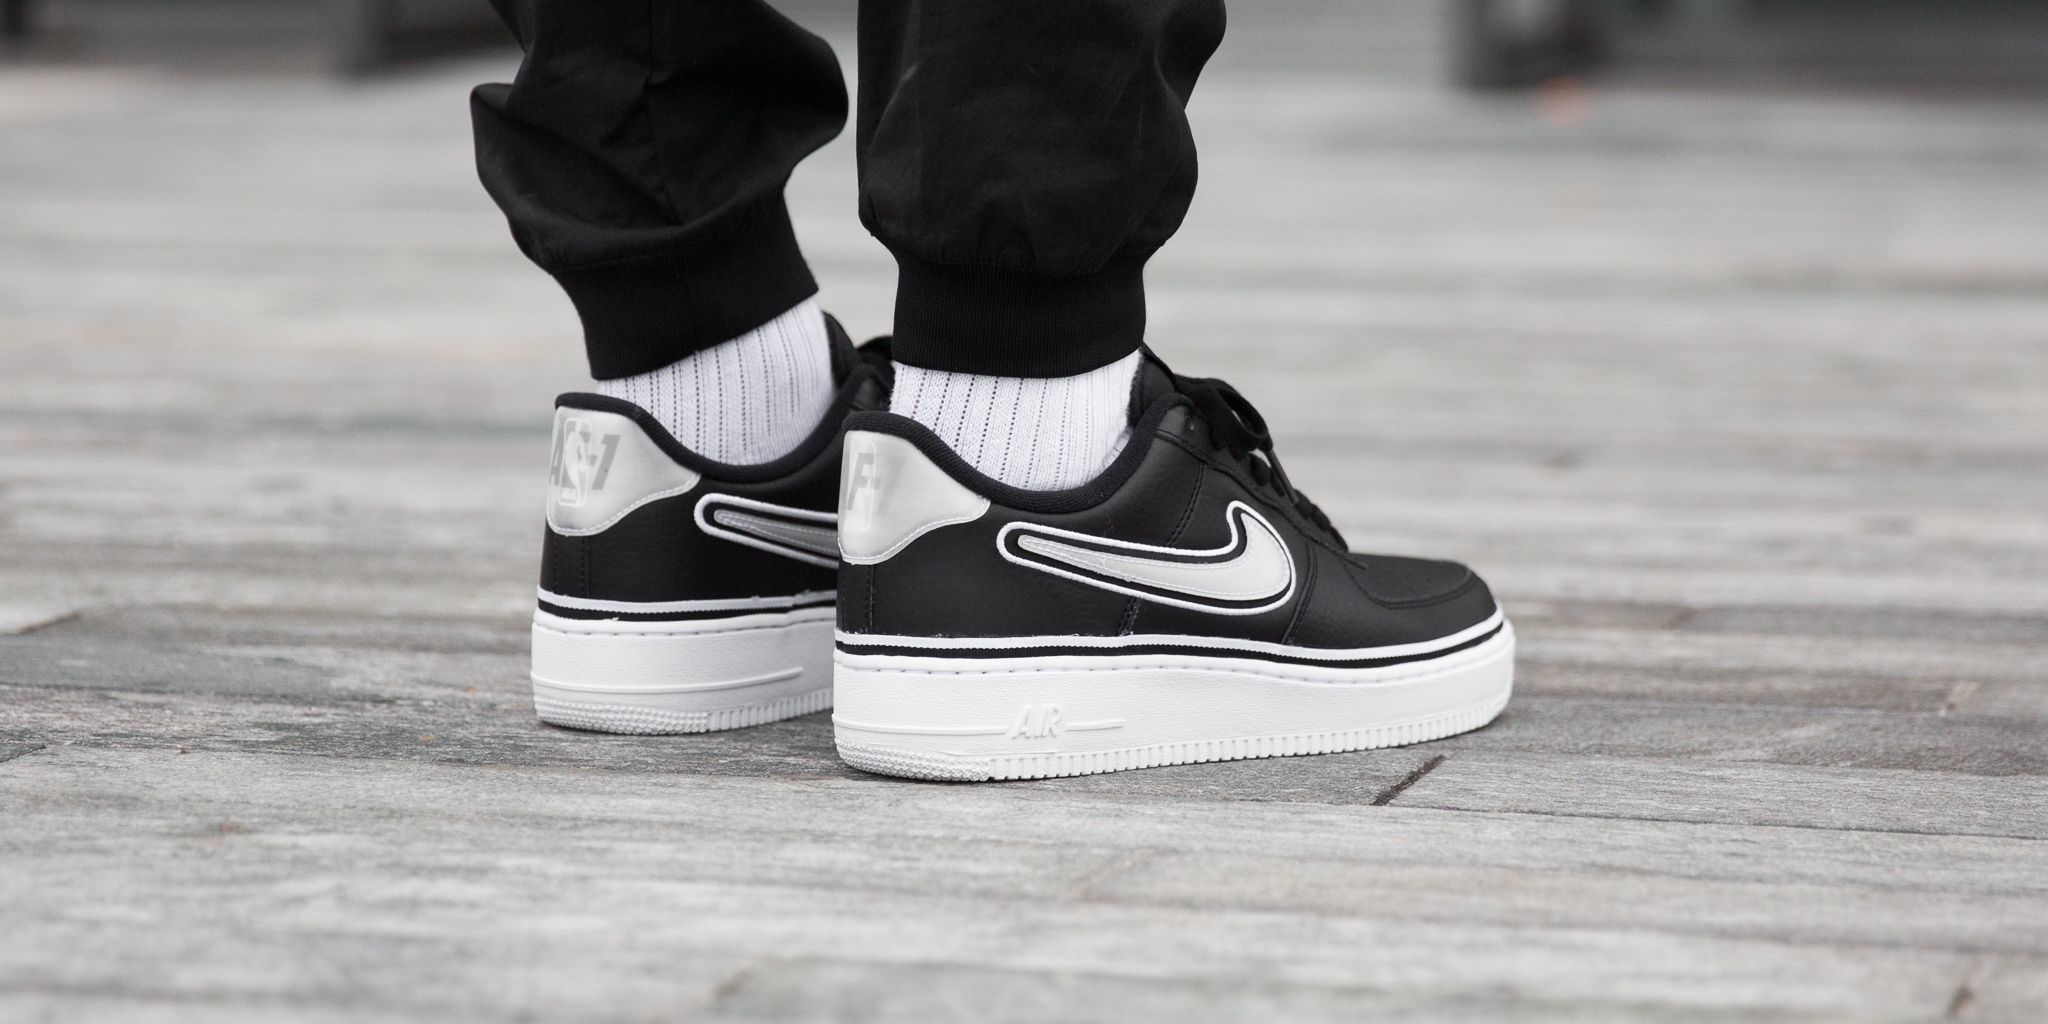 Look Out For The Nike Air Force 1 '07 LV8 NBA White Black